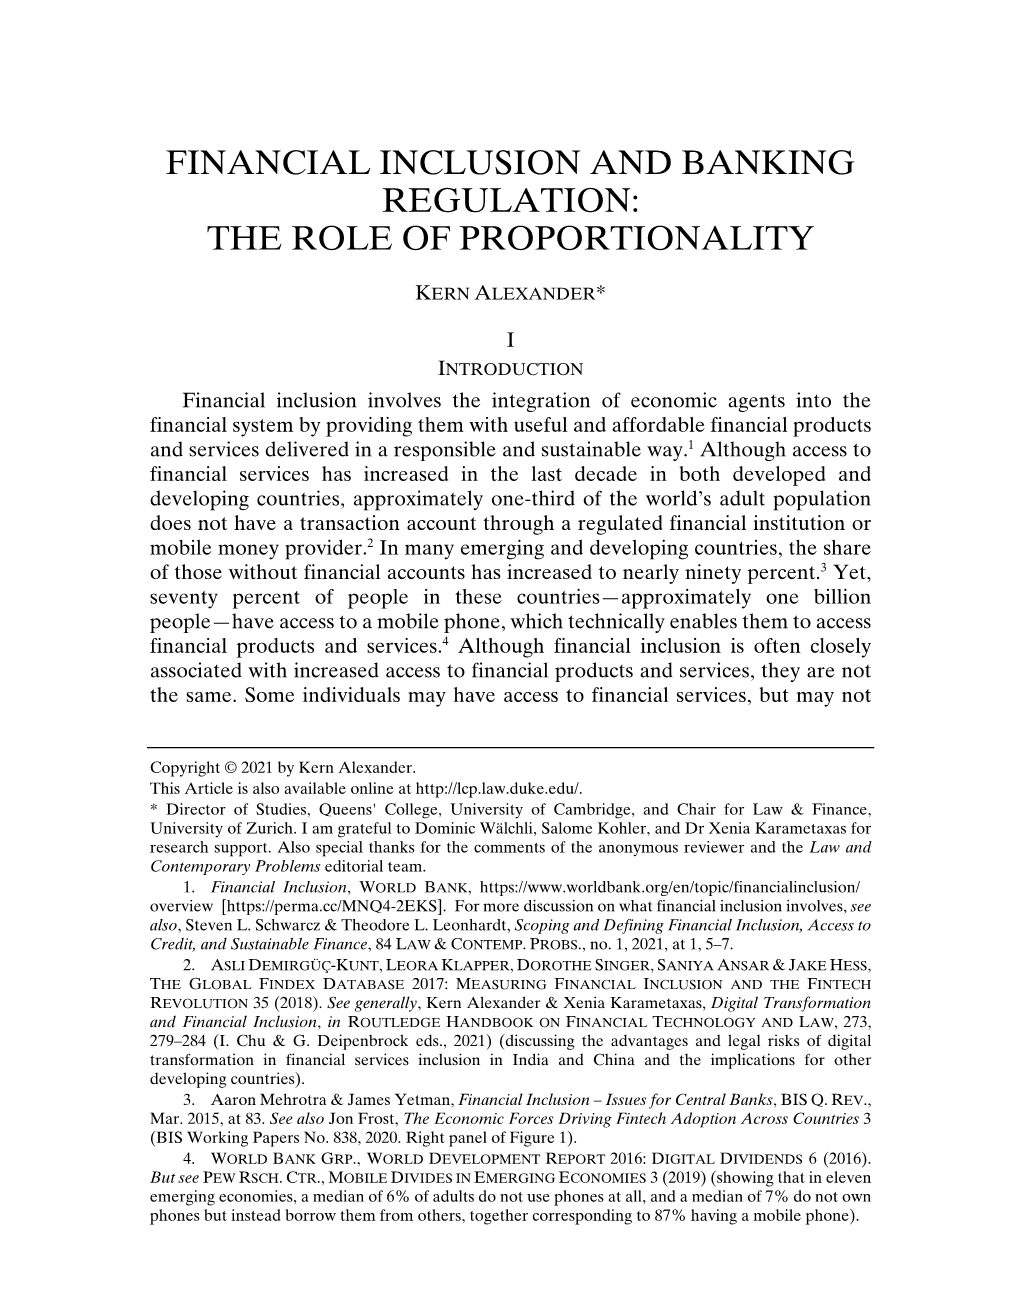 Financial Inclusion and Banking Regulation: the Role of Proportionality